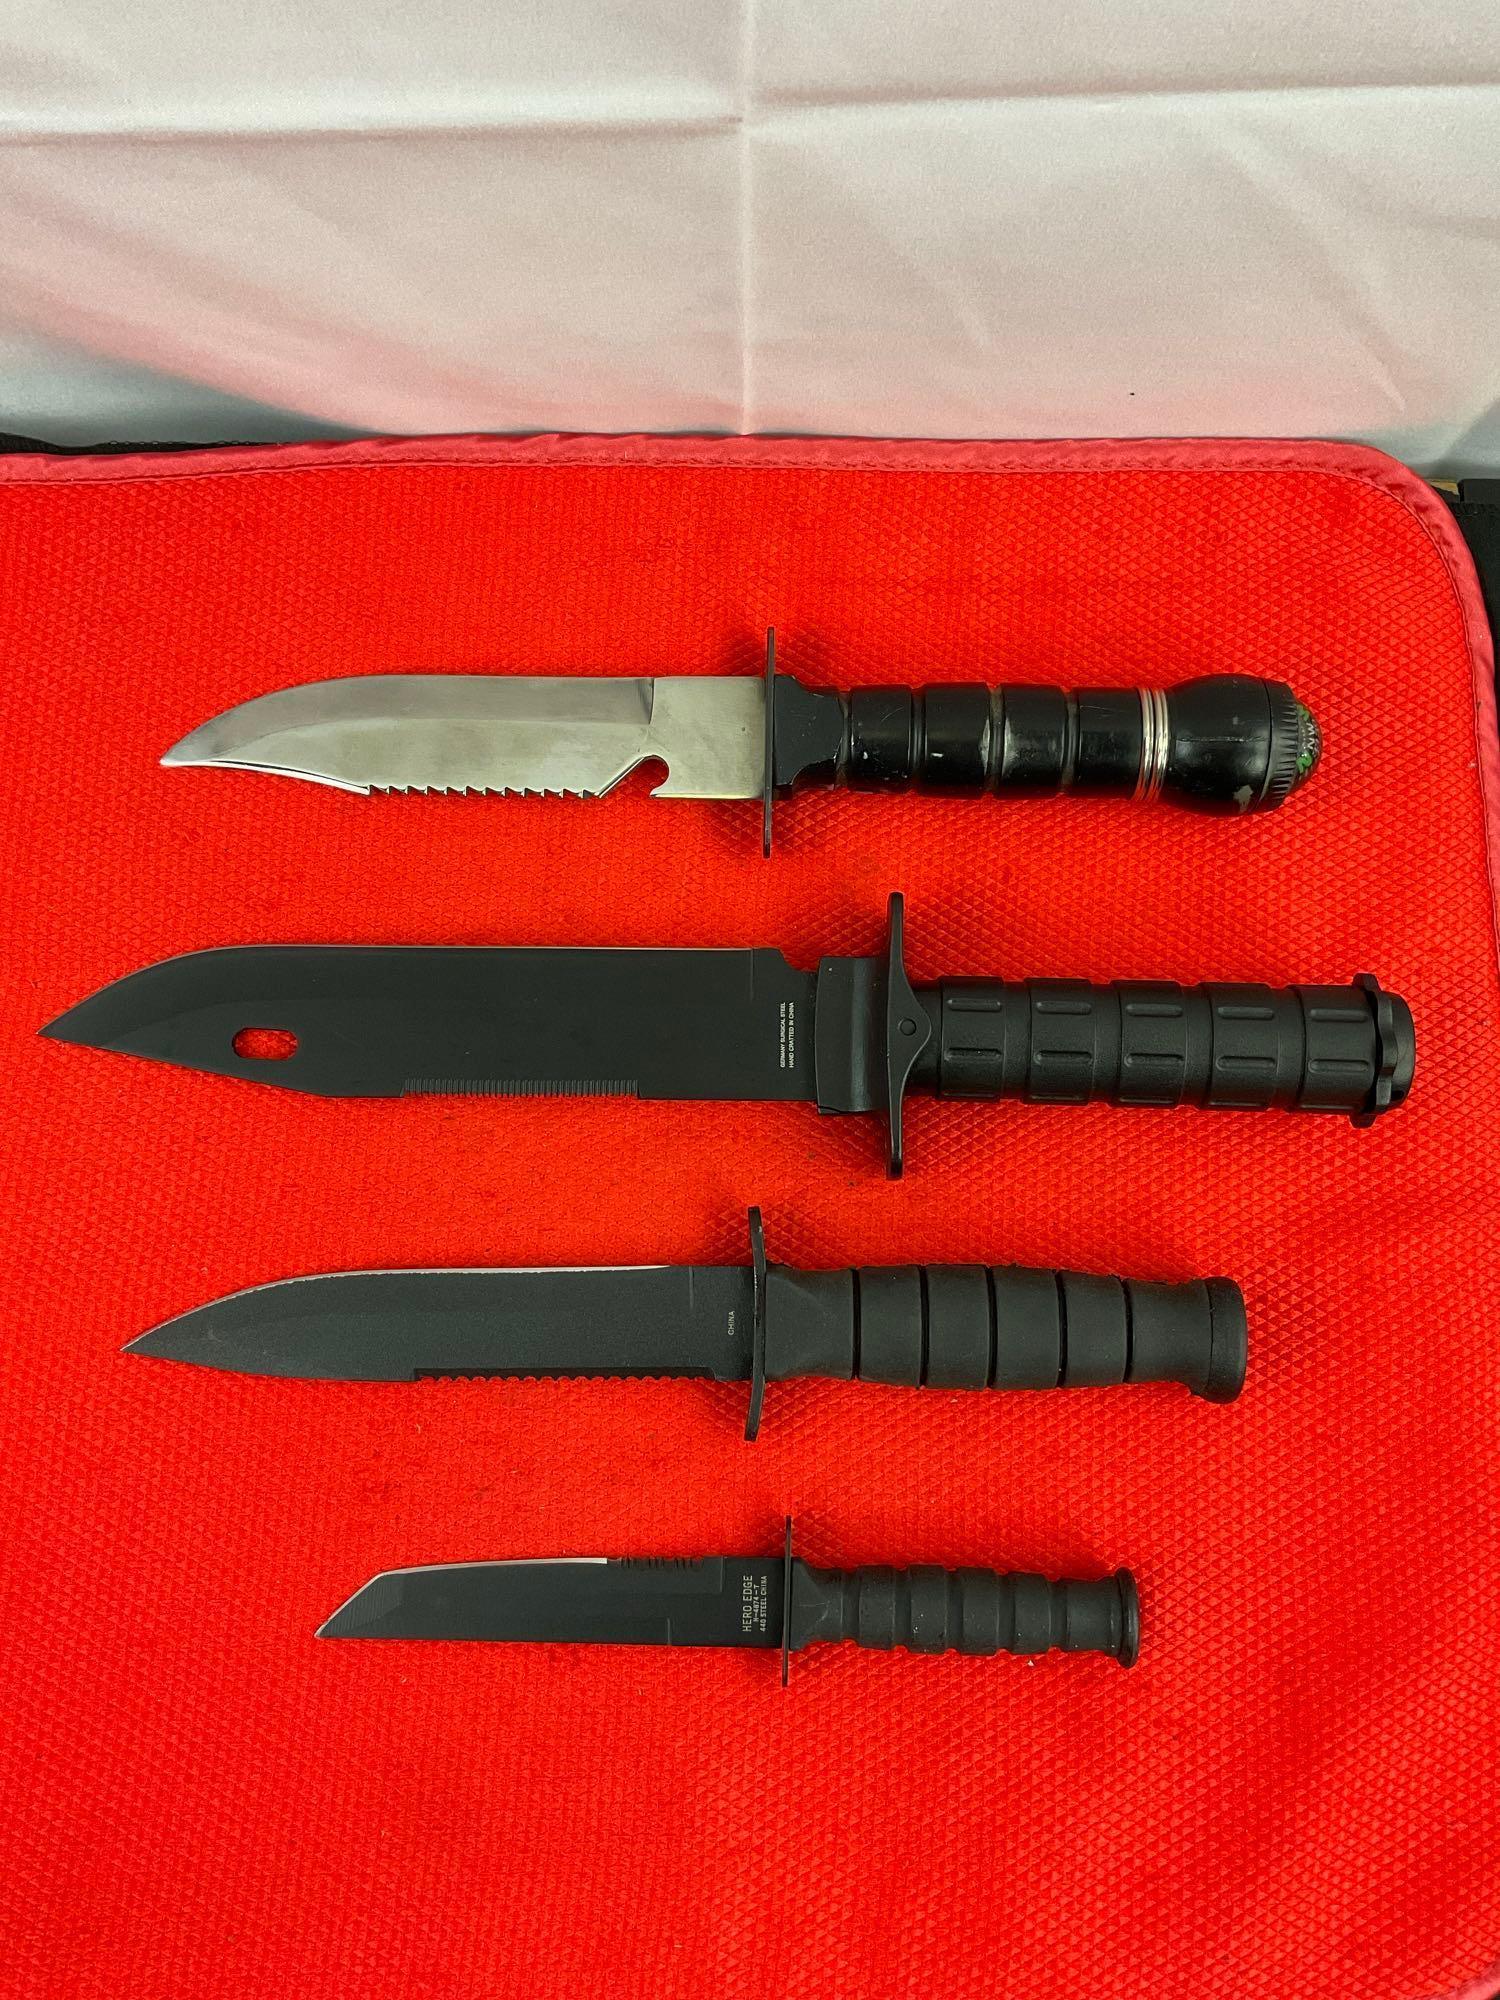 4 pcs Steel Fixed Blade Bowie Knives w/ Sheathes. 1x Hero Edge, 1x Outback, 1x D.O.T.T. See pics.